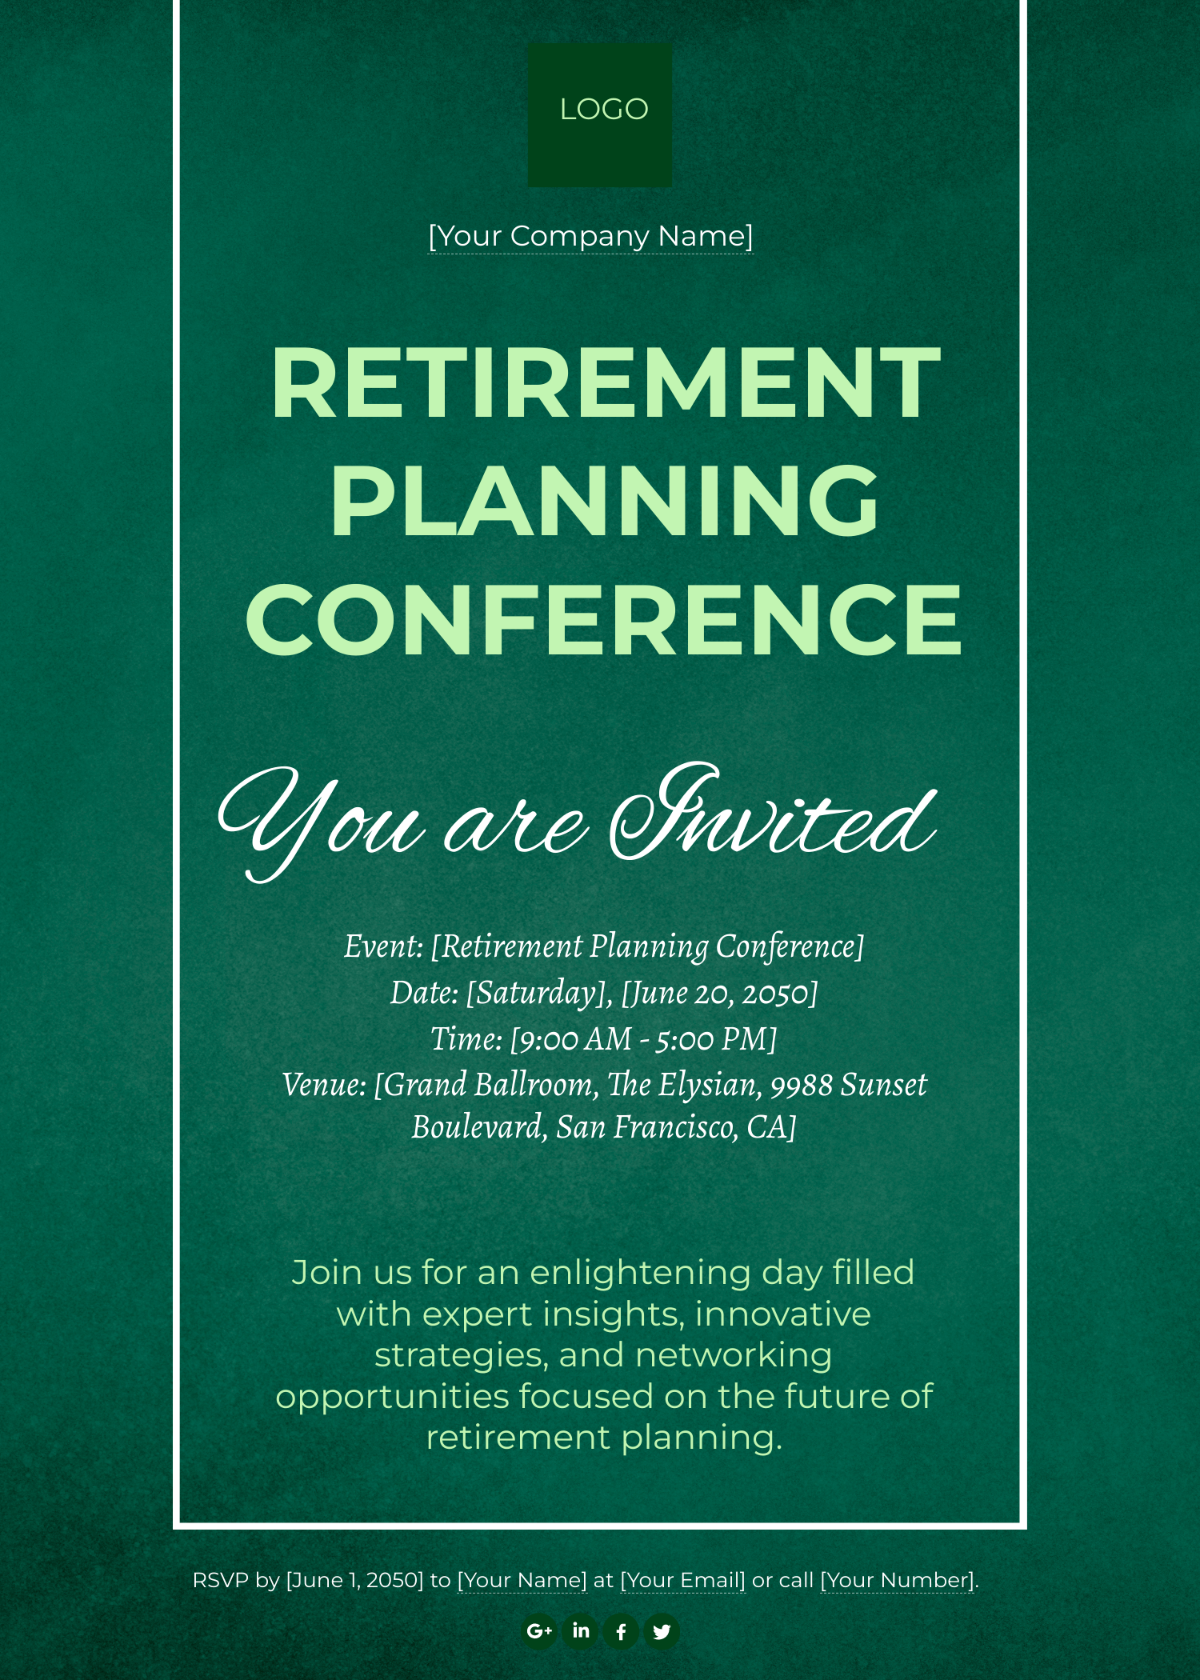 Retirement Planning Conference Invitation Card Template